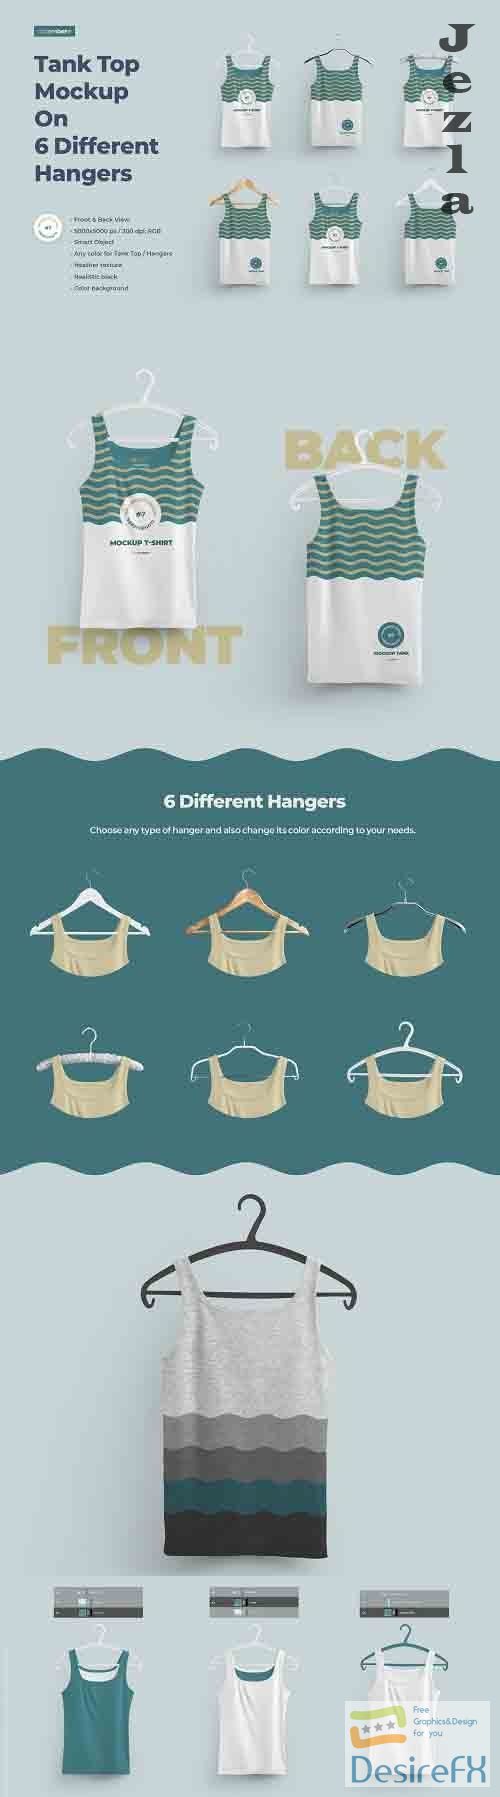 2 Mockups Tank Top With 6 Different Hangers - 64127